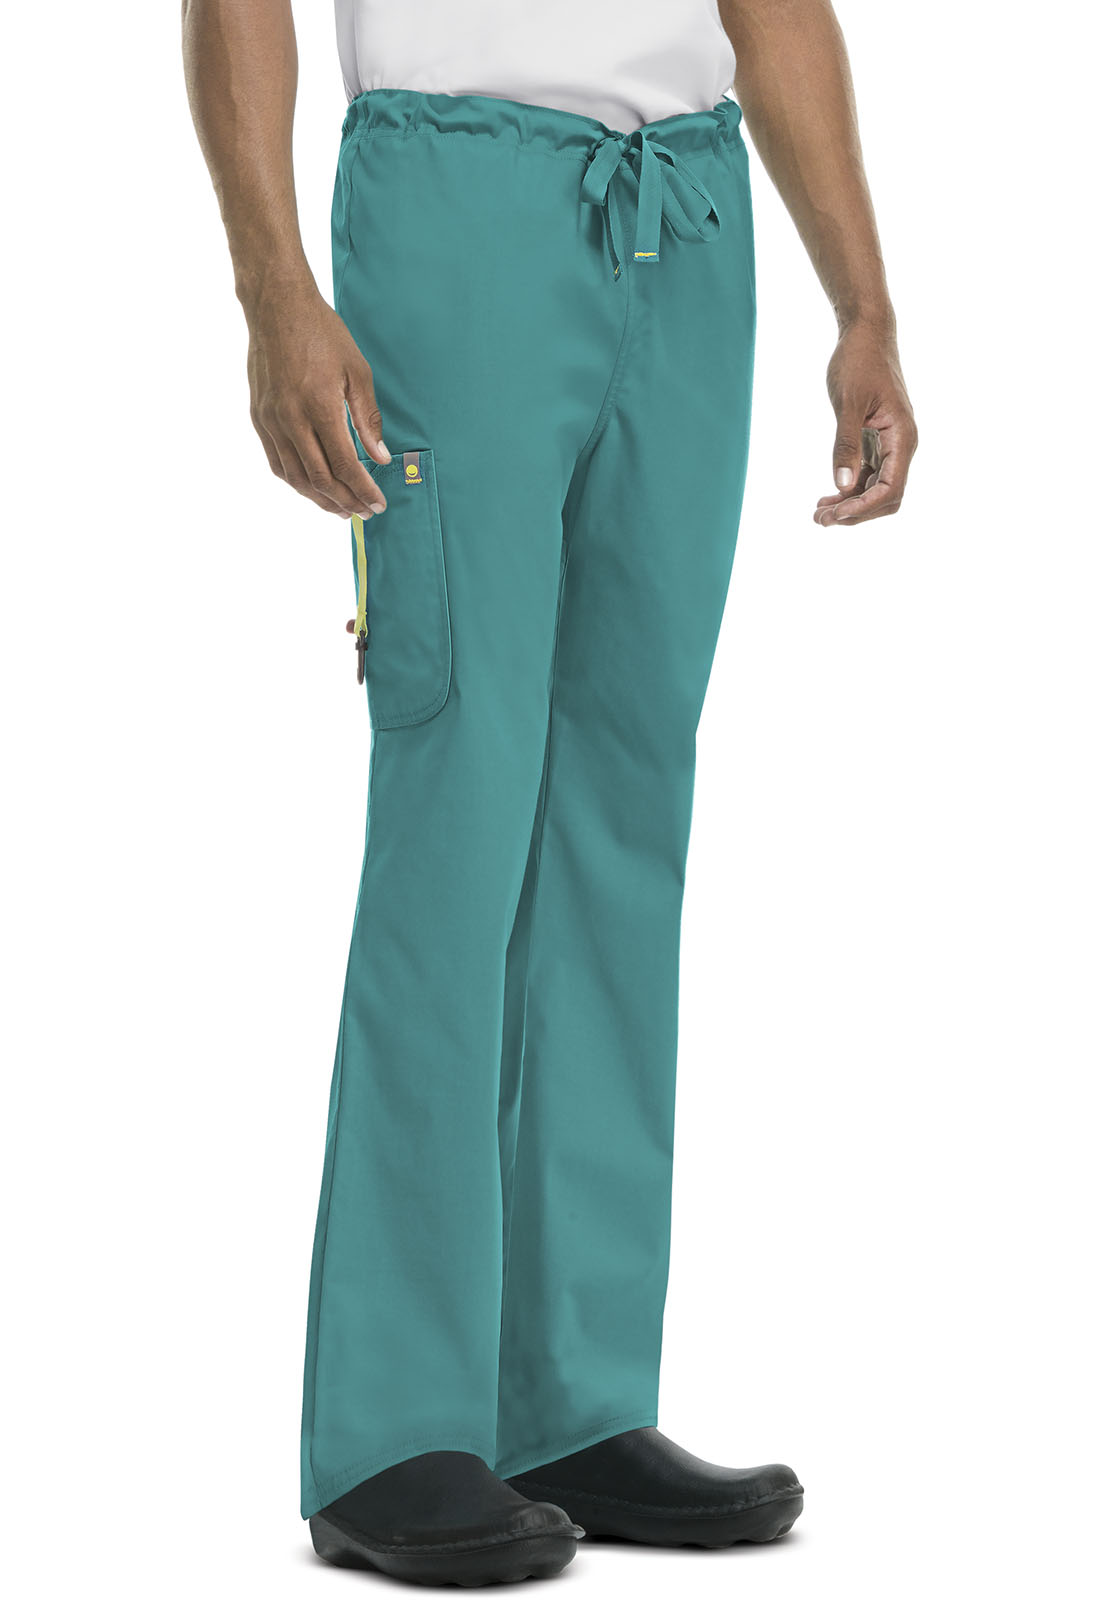 Bliss Men's Drawstring Cargo Pant in Teal 16001A-TLCH from Cherokee ...